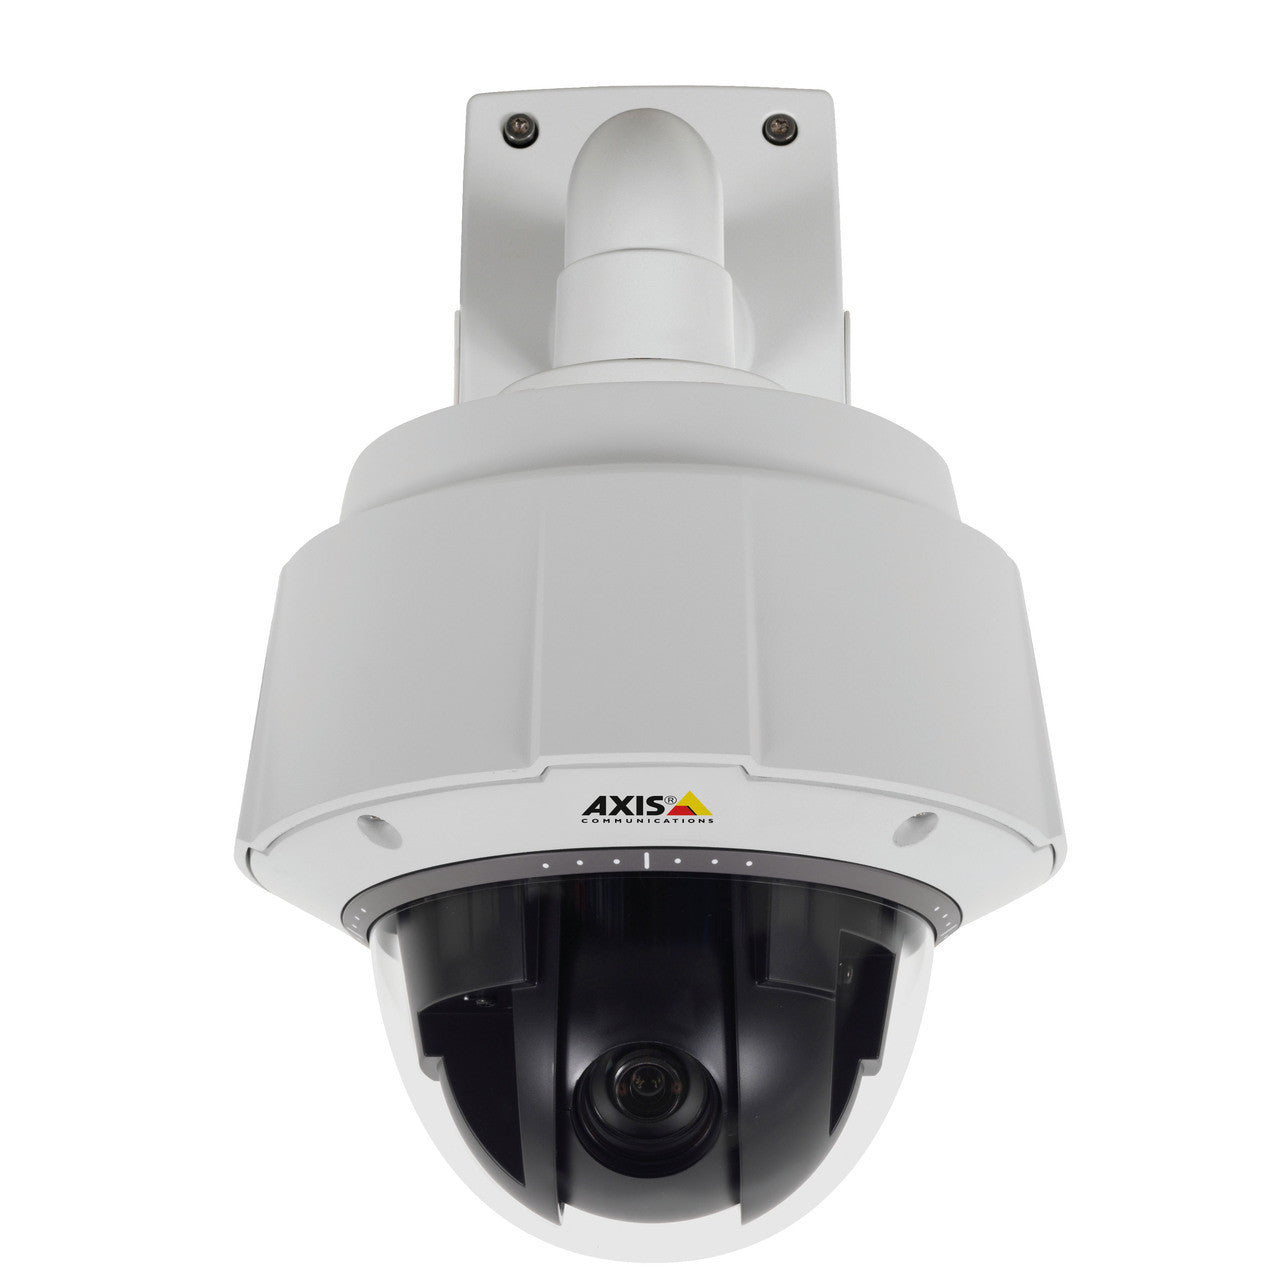 AXIS Q6044-E with T91A61 Wall Mount (not included)